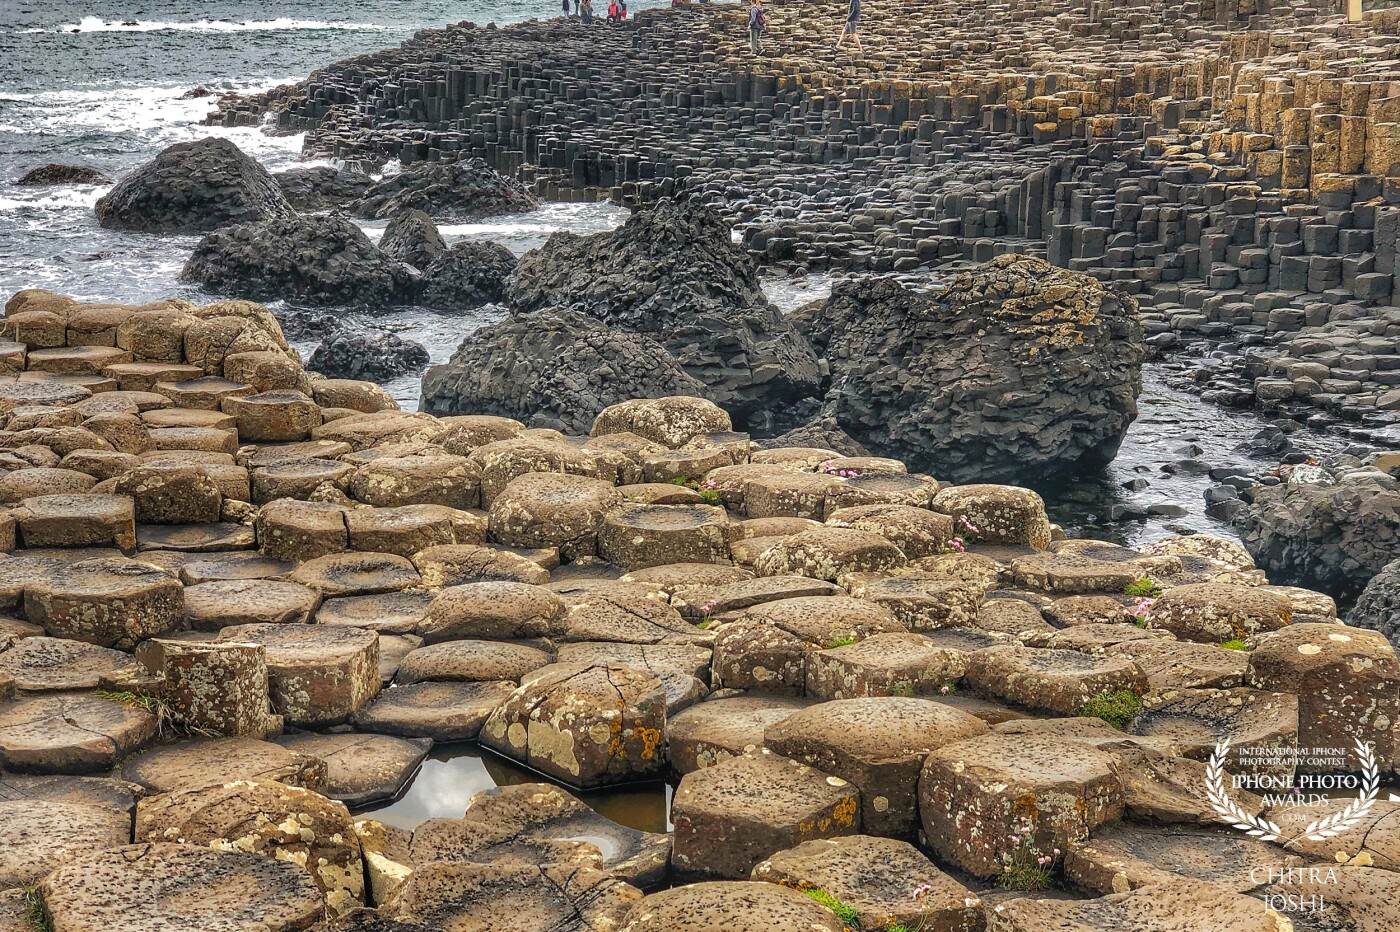 This photo is taken at the famous UNESCO heritage, The Giant's Causeway in Northern Ireland, UK. Look at those perfectly hexagonal stacks of stones. It is believed to be formed due to volcanic eruption.